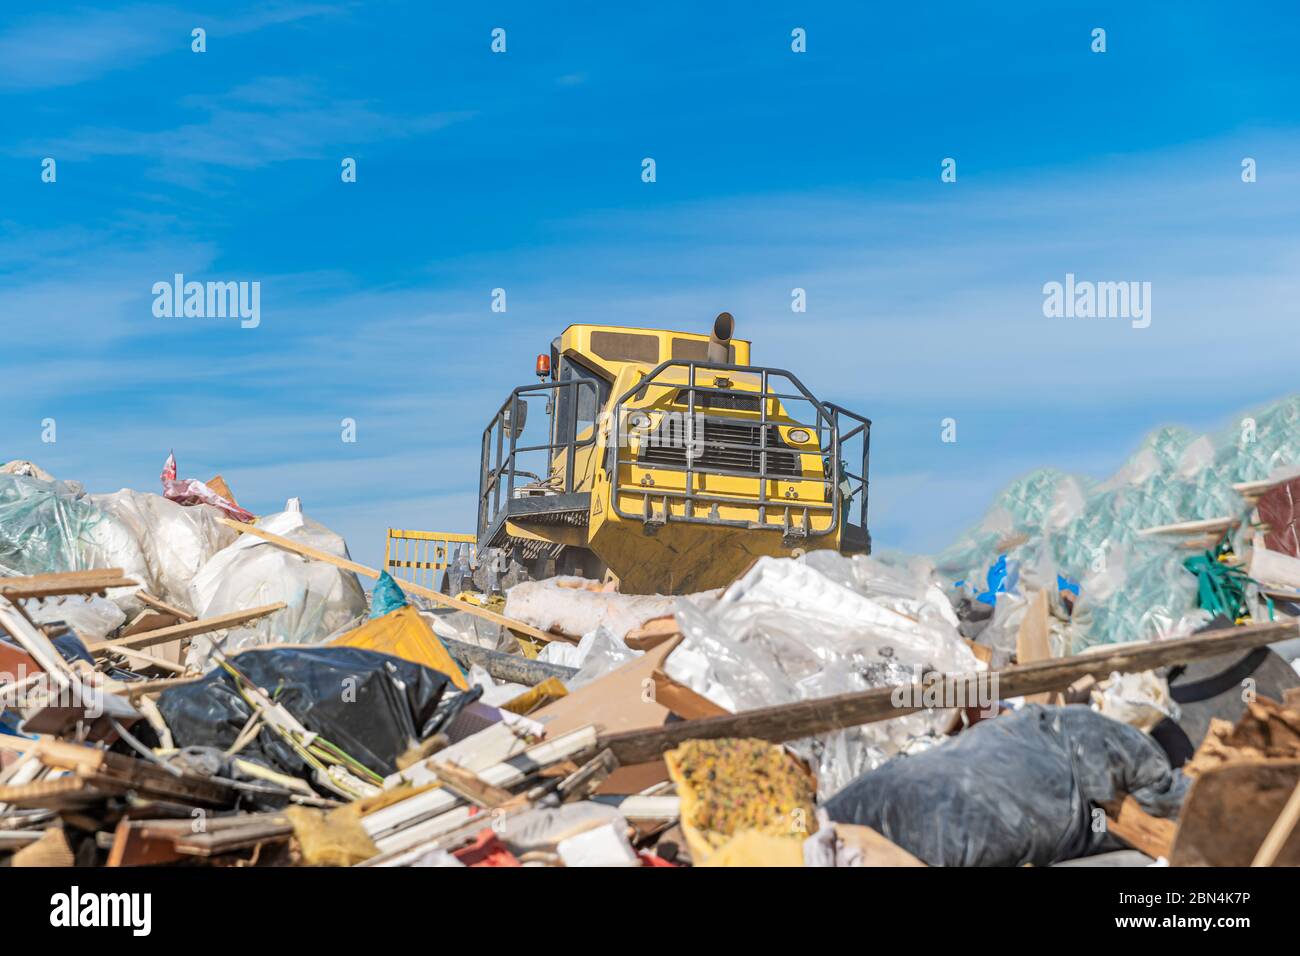 compactor processes waste at a landfill Stock Photo